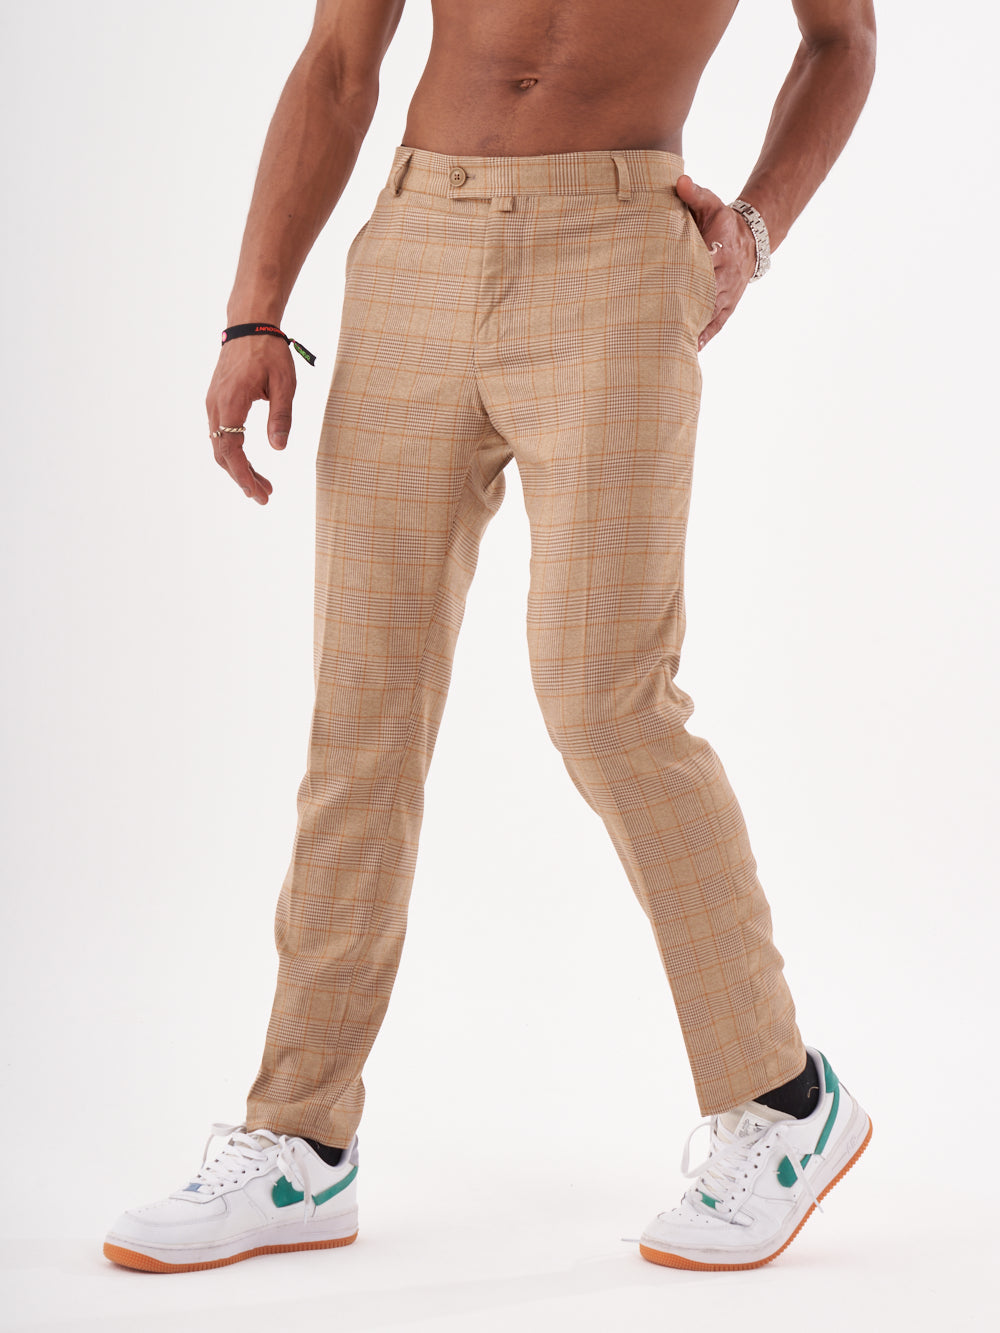 A man in a Barot pants posing for a photo.